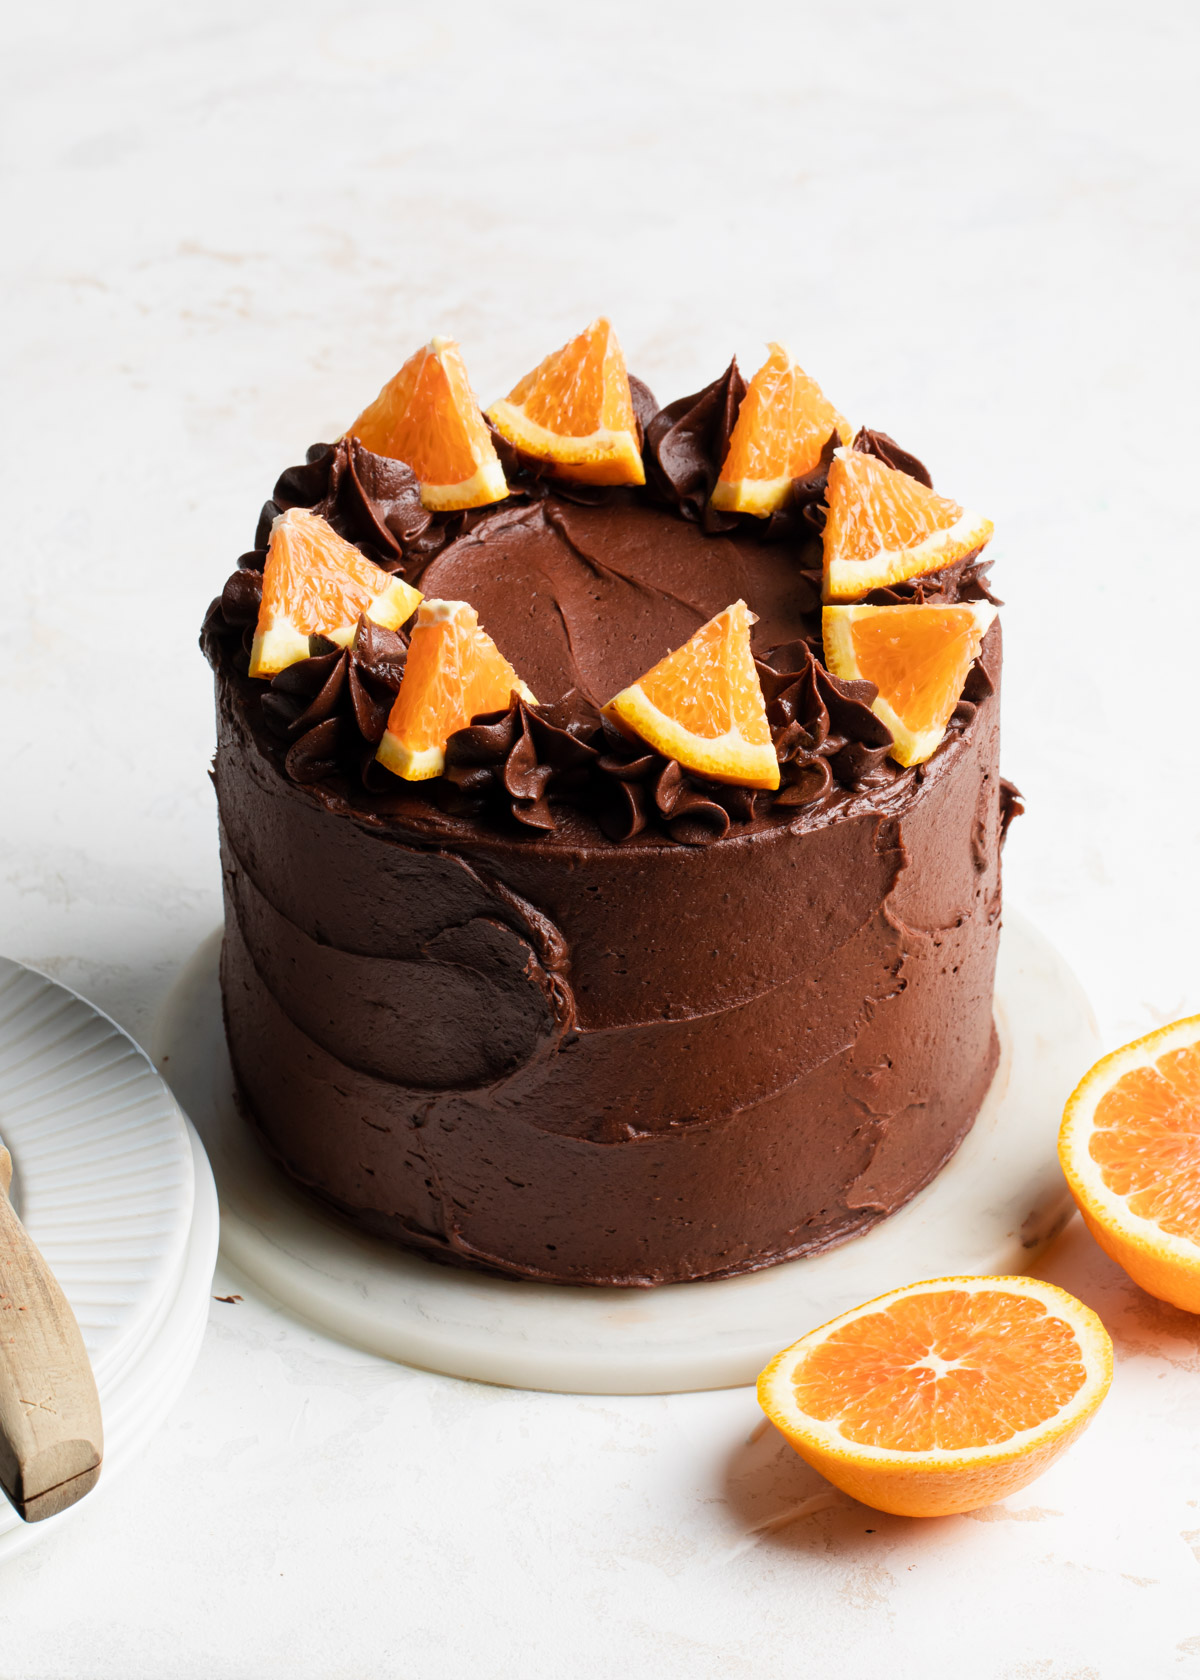 A chocolate layer cake and fudge frosting with slices of fresh orange on top.